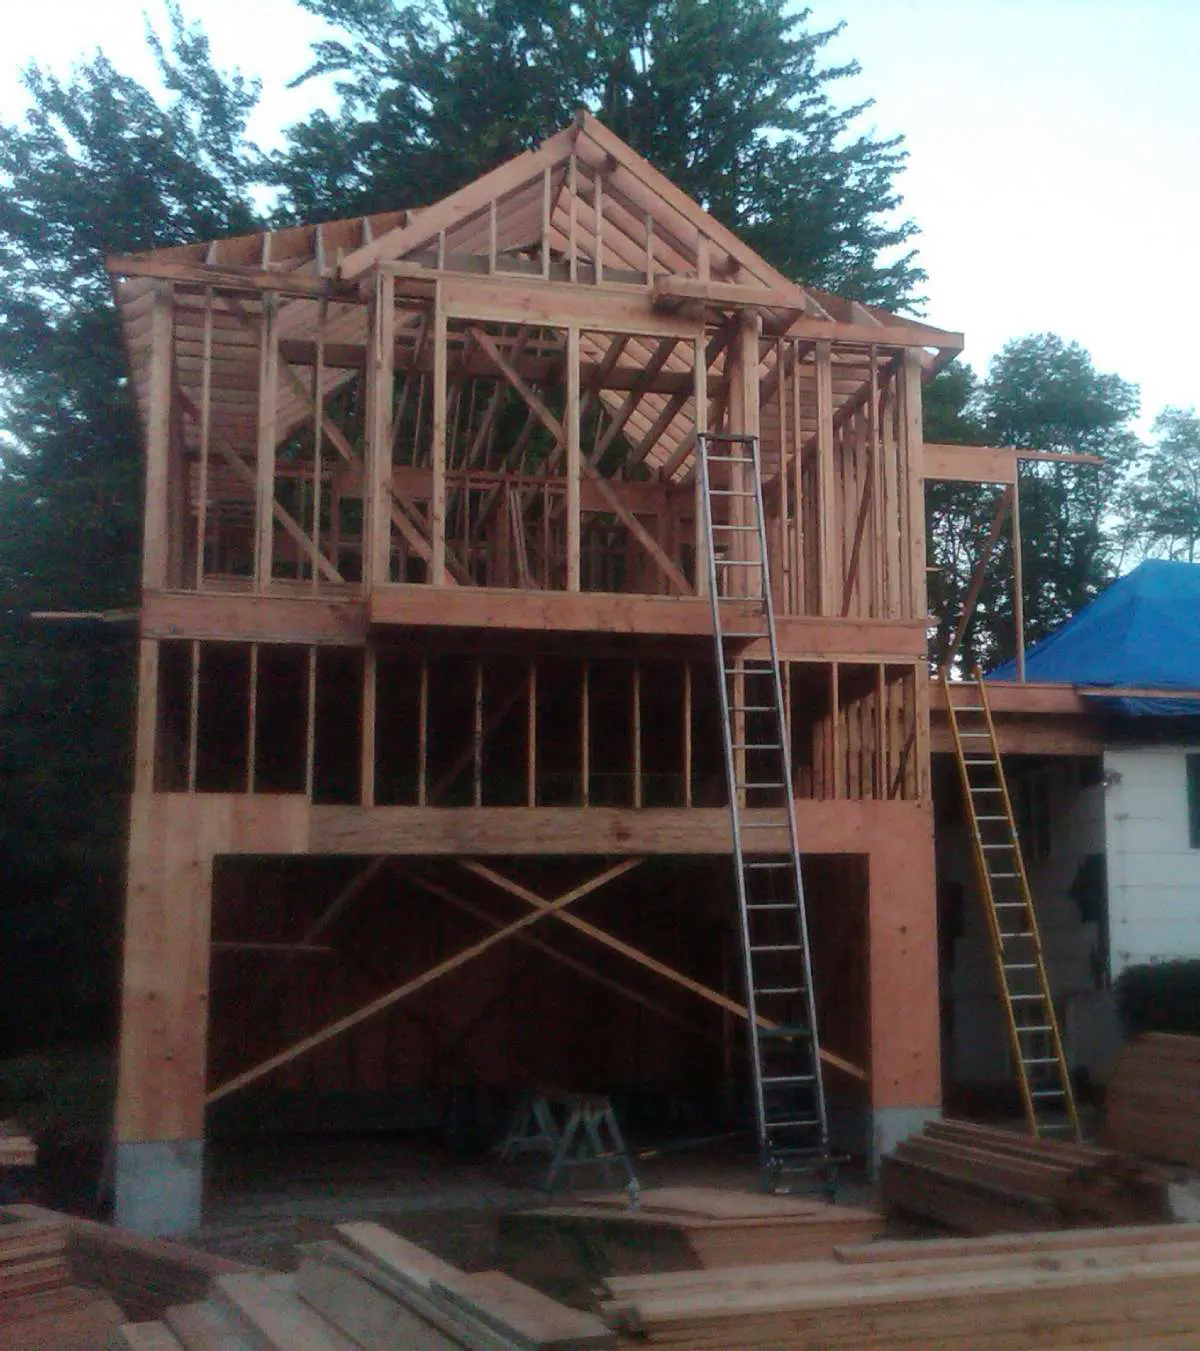 A house being built with some wood framing